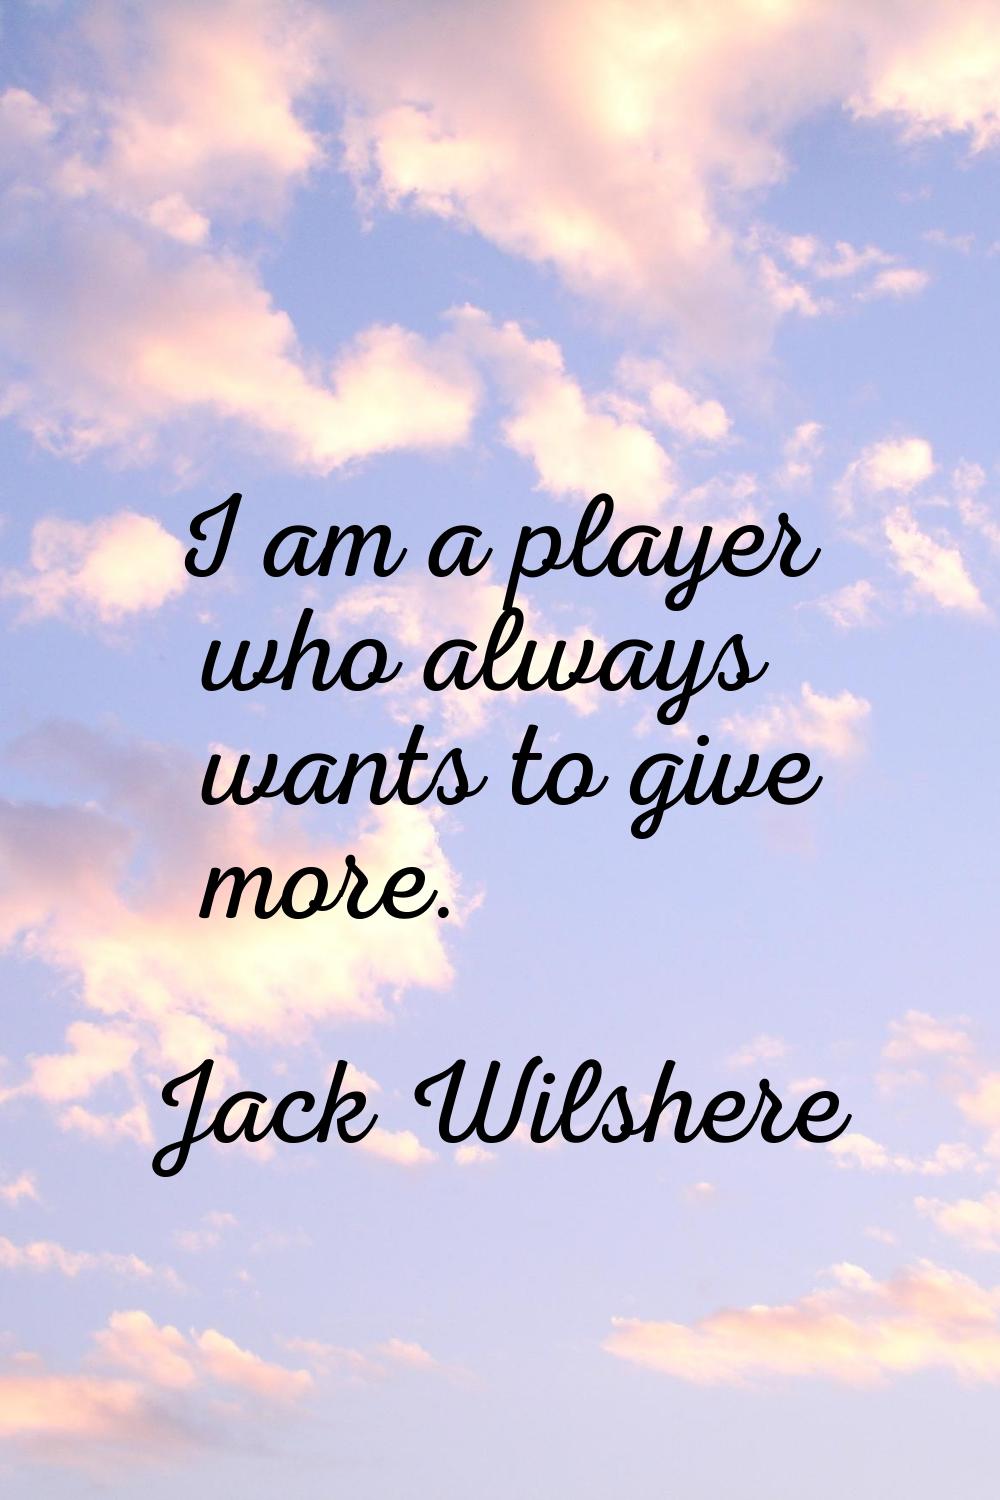 I am a player who always wants to give more.